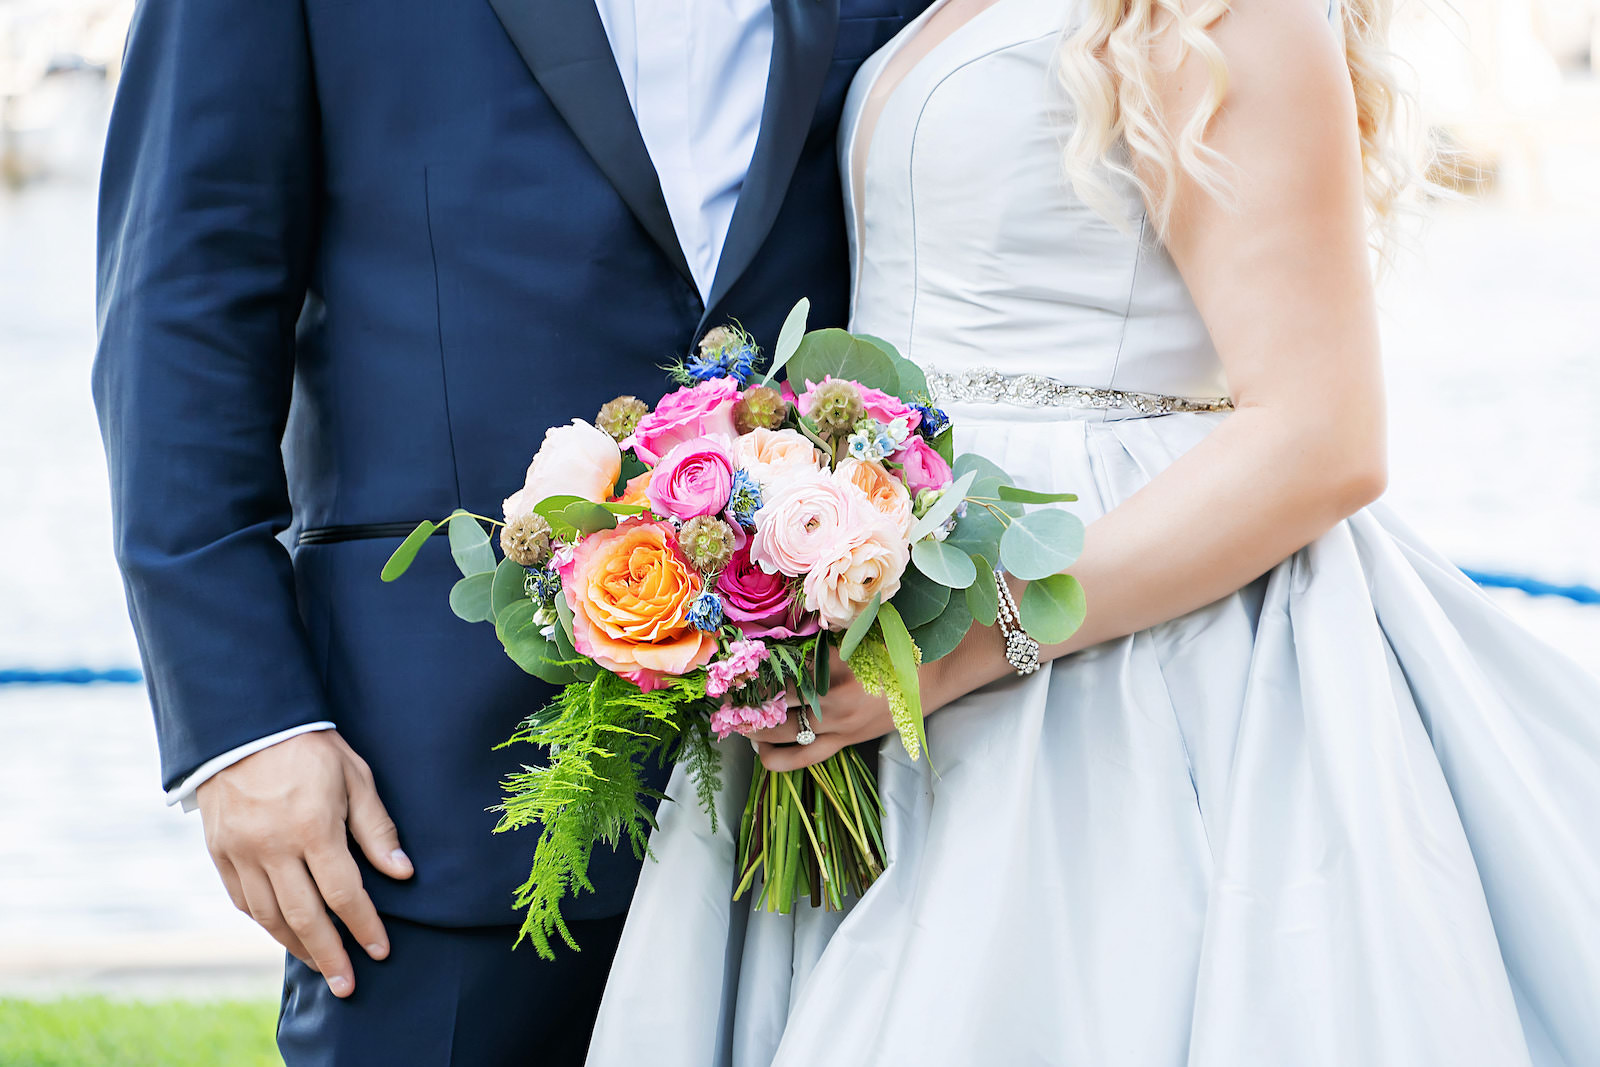 Bride and Groom Close Up Wedding Bouquet with Orange and Pink Bright Florals Wedding Portrait | Florida Photographer Limelight Photography